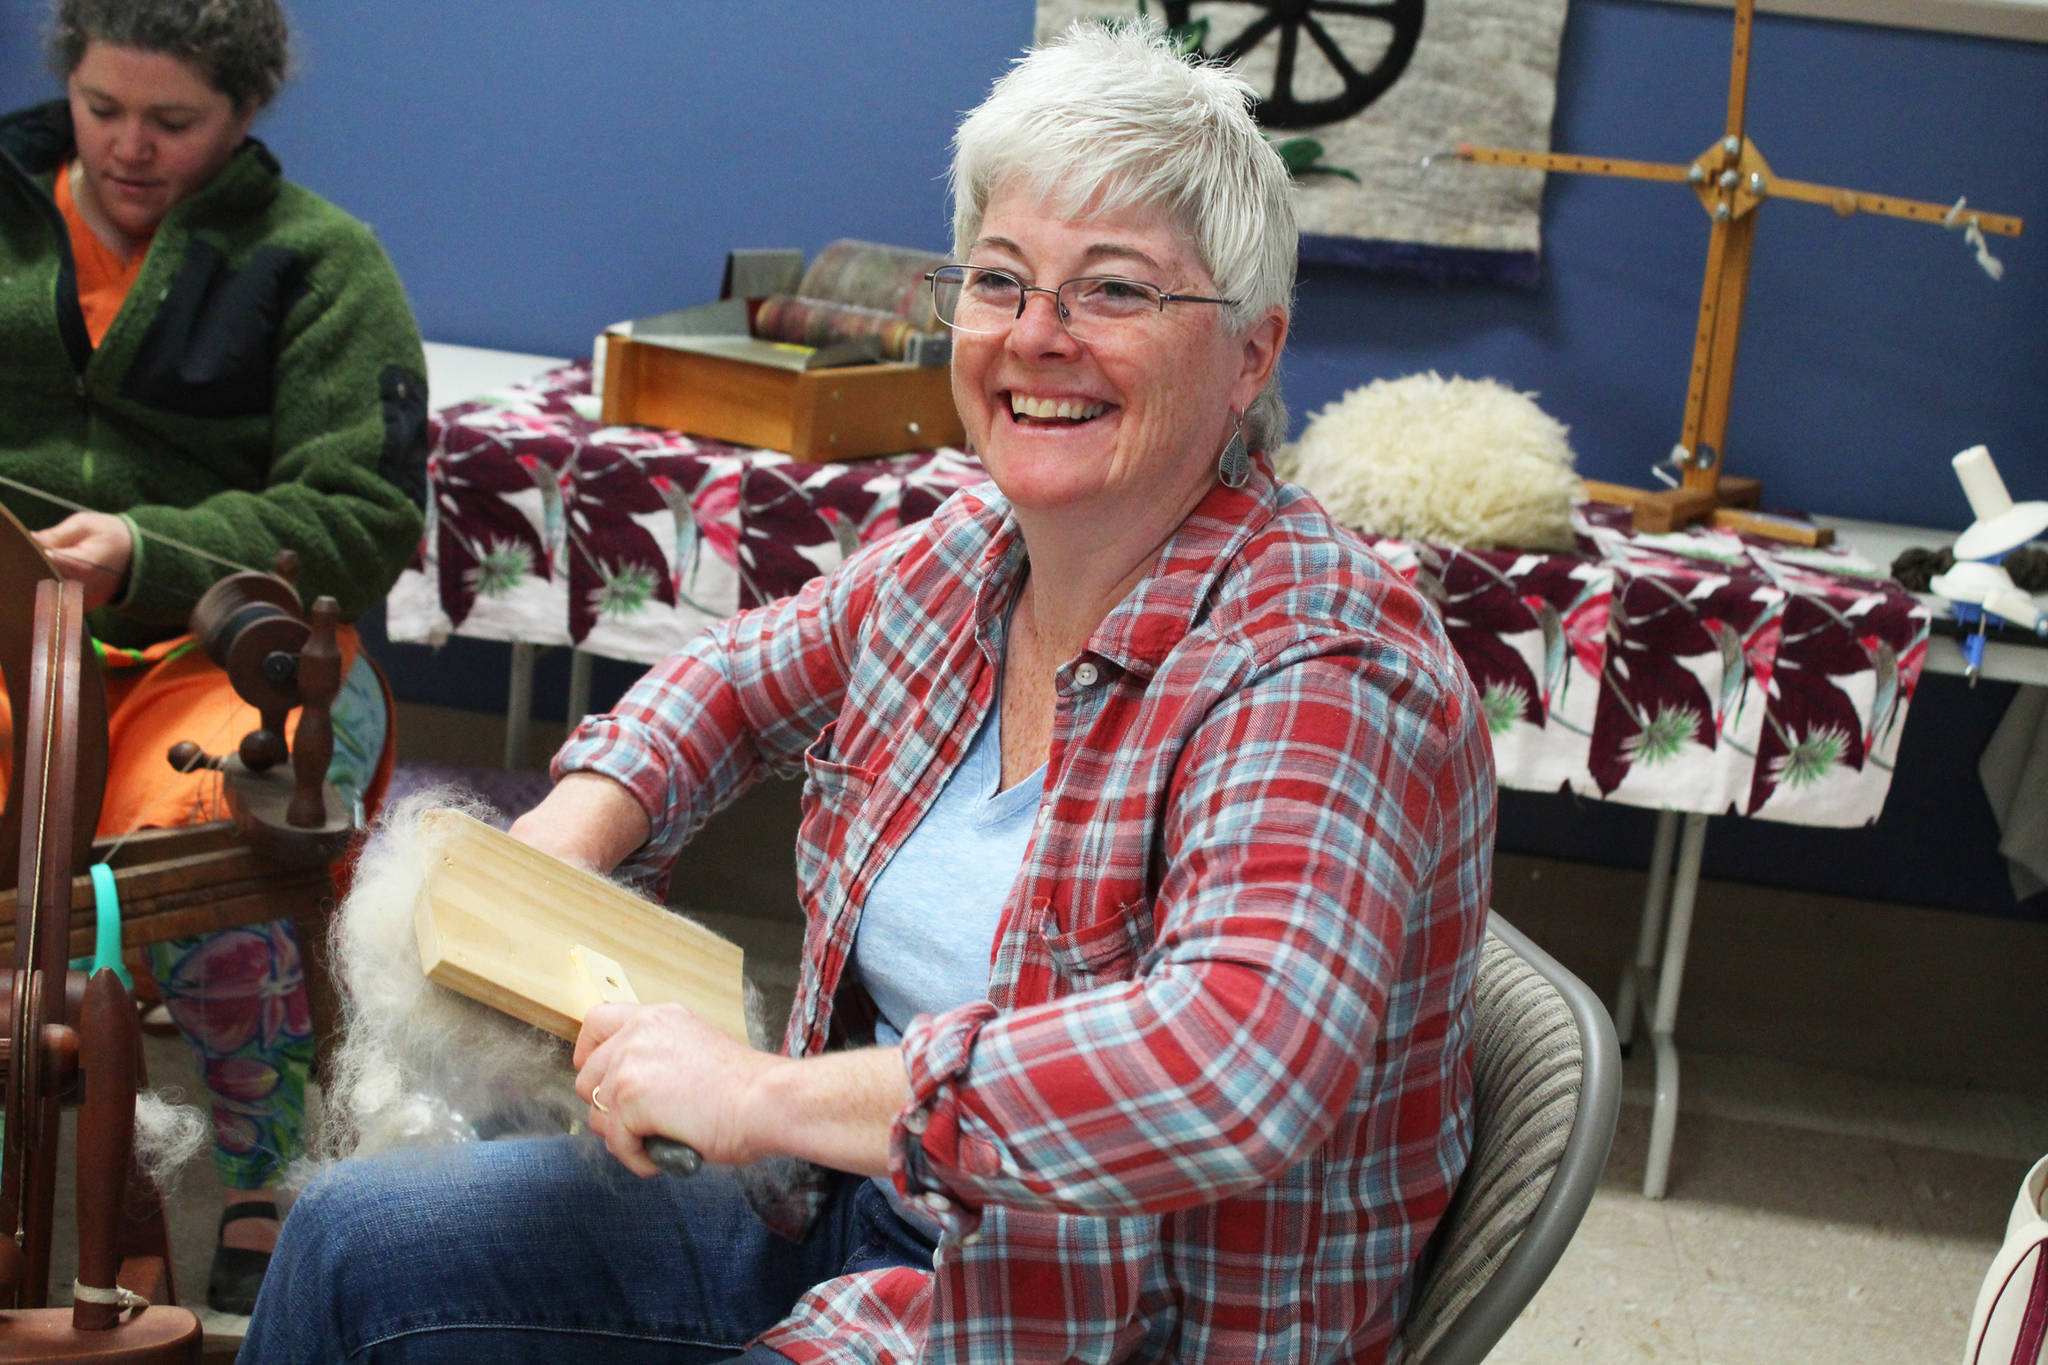 Karen Porter, a member of the Fireweed Fiber Guild, prepares some fibers while spinning yarn with other guild members Friday, Aug. 18, 2017 at the 2017 Kenai Peninsula Fair in Ninilchik, Alaska. The guild will host the Fireweed FiberFest on Saturday and Sunday, Sept. 29 and 30, 2018 at the Soldotna Sports Complex in Soldotna, Alaska. (Photo by Megan Pacer/Homer News)